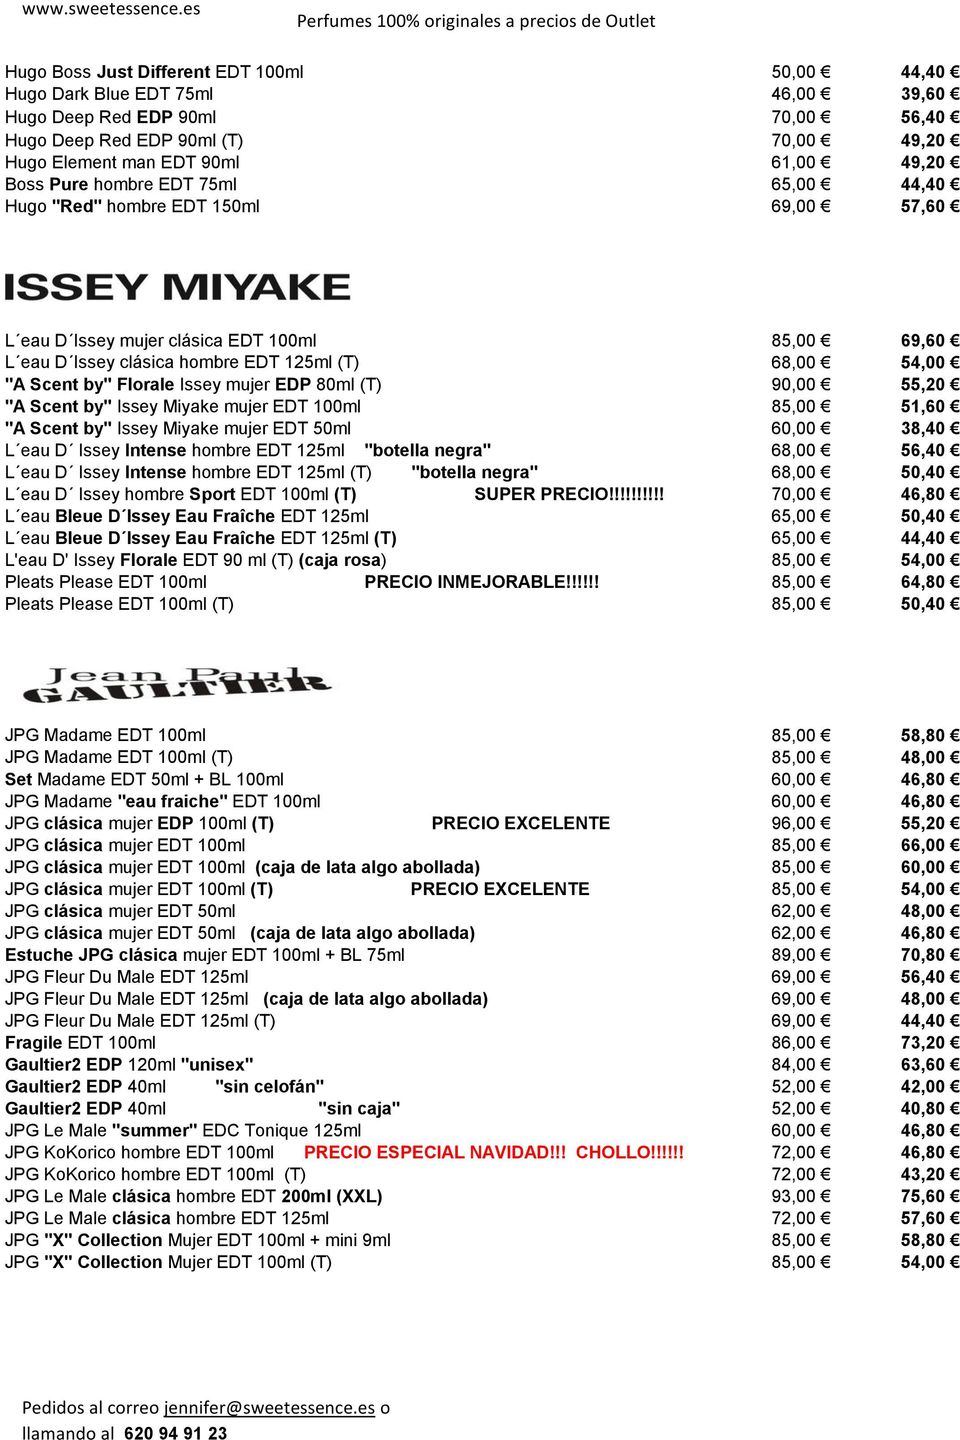 Issey mujer EDP 80ml (T) 90,00 55,20 "A Scent by" Issey Miyake mujer EDT 100ml 85,00 51,60 "A Scent by" Issey Miyake mujer EDT 50ml 60,00 38,40 L eau D Issey Intense hombre EDT 125ml "botella negra"